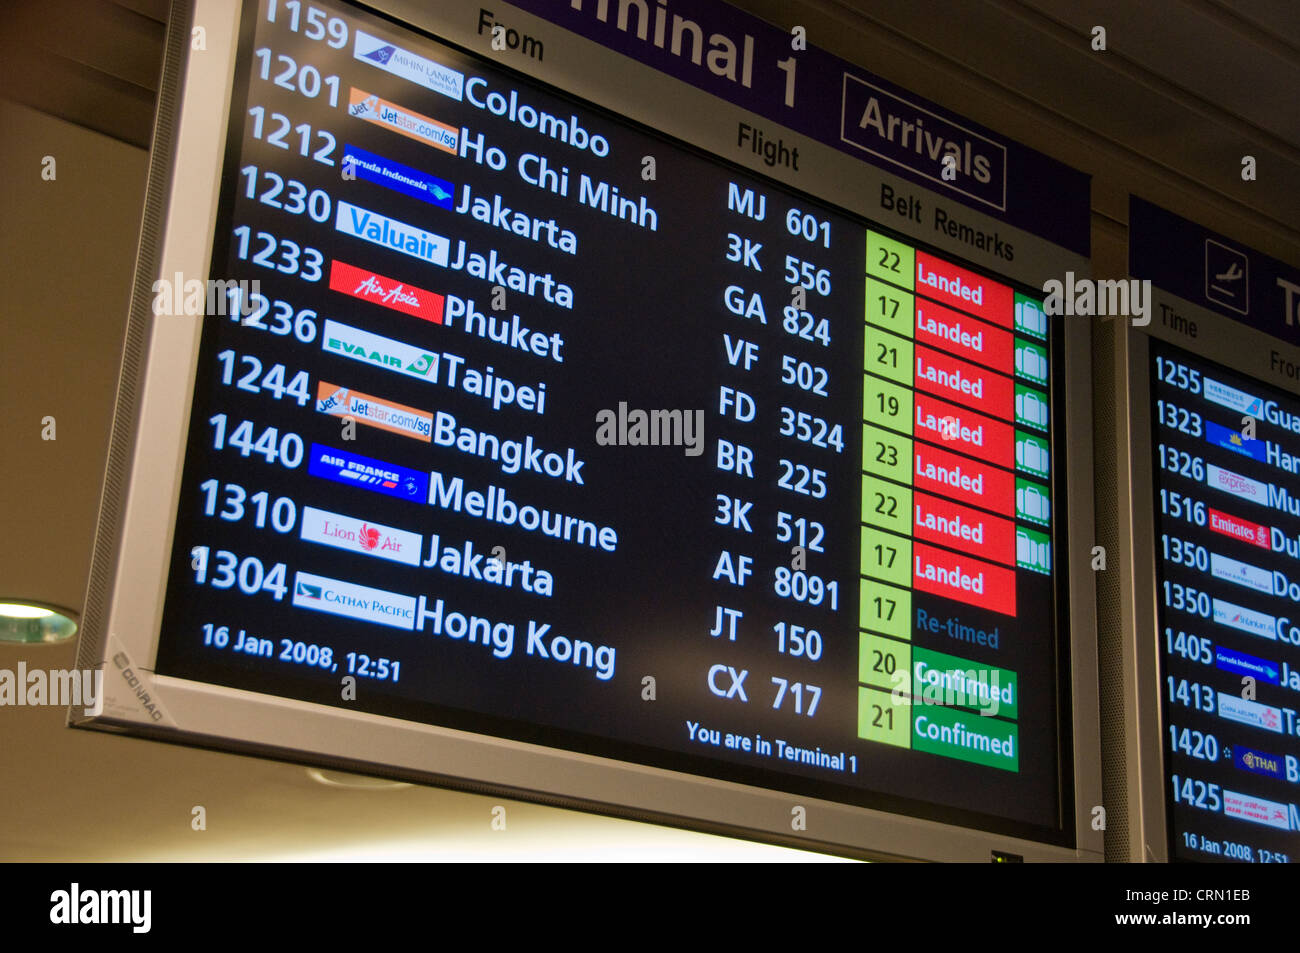 Flatscreen CRT monitors for departure and arrival times at new modern Changi airport in Singapore southeast Asia Stock Photo